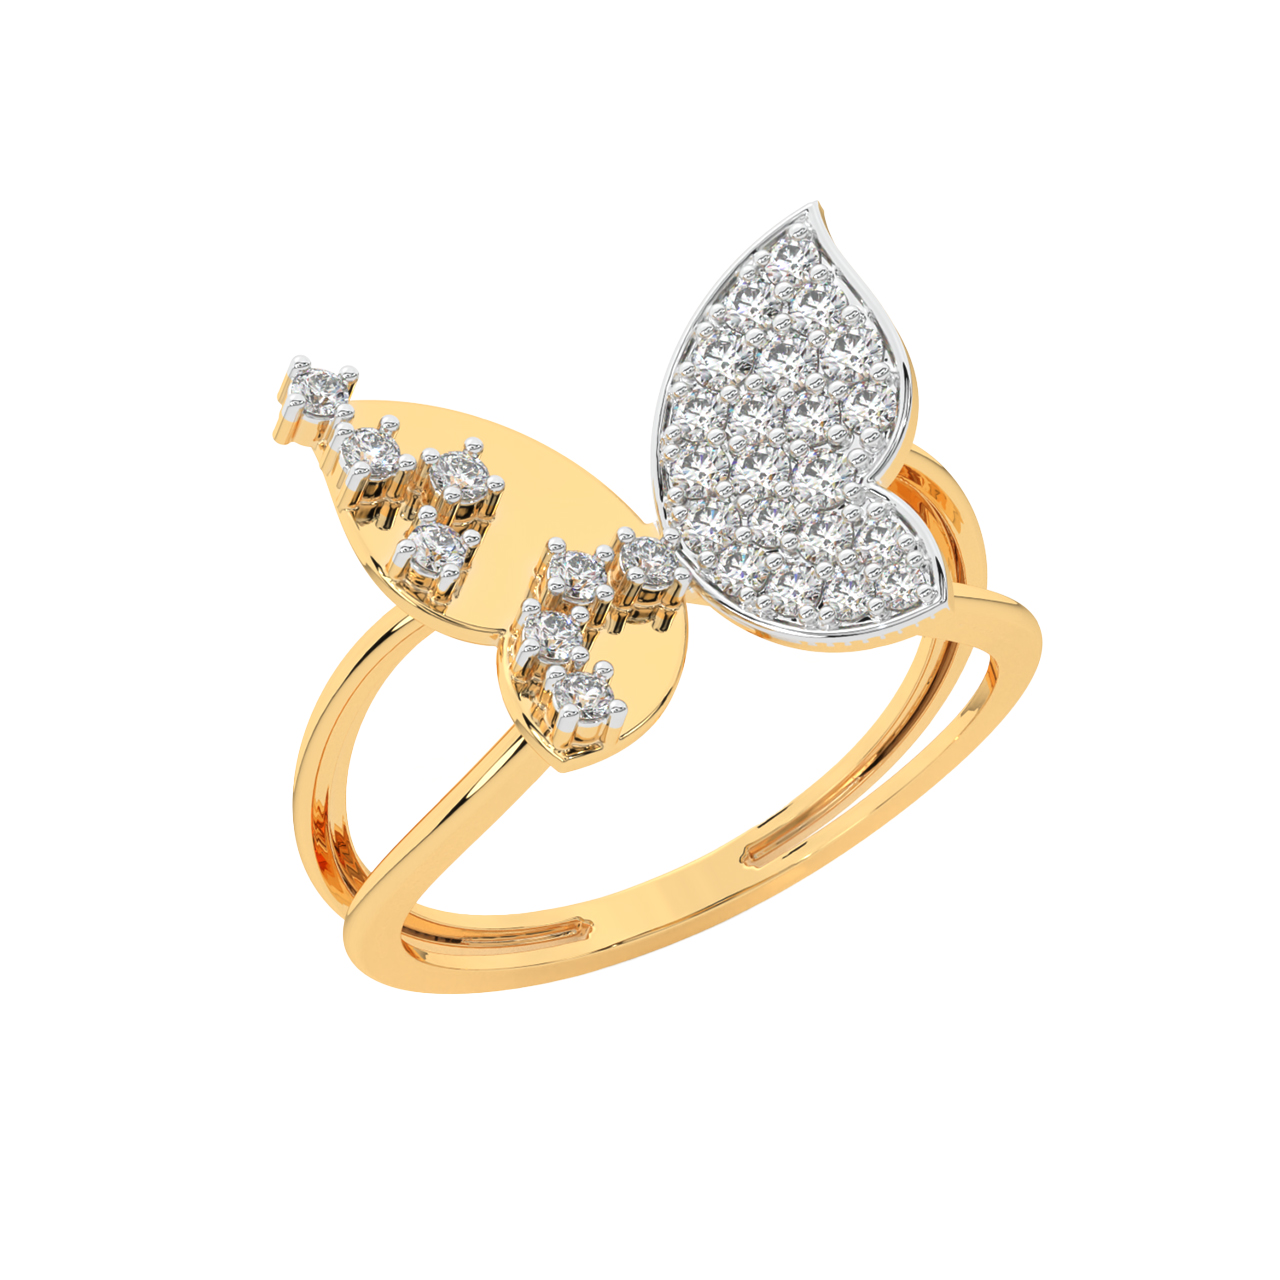 Buy Leaf Diamond Ring in India | Chungath Jewellery Online- Rs. 19,650.00